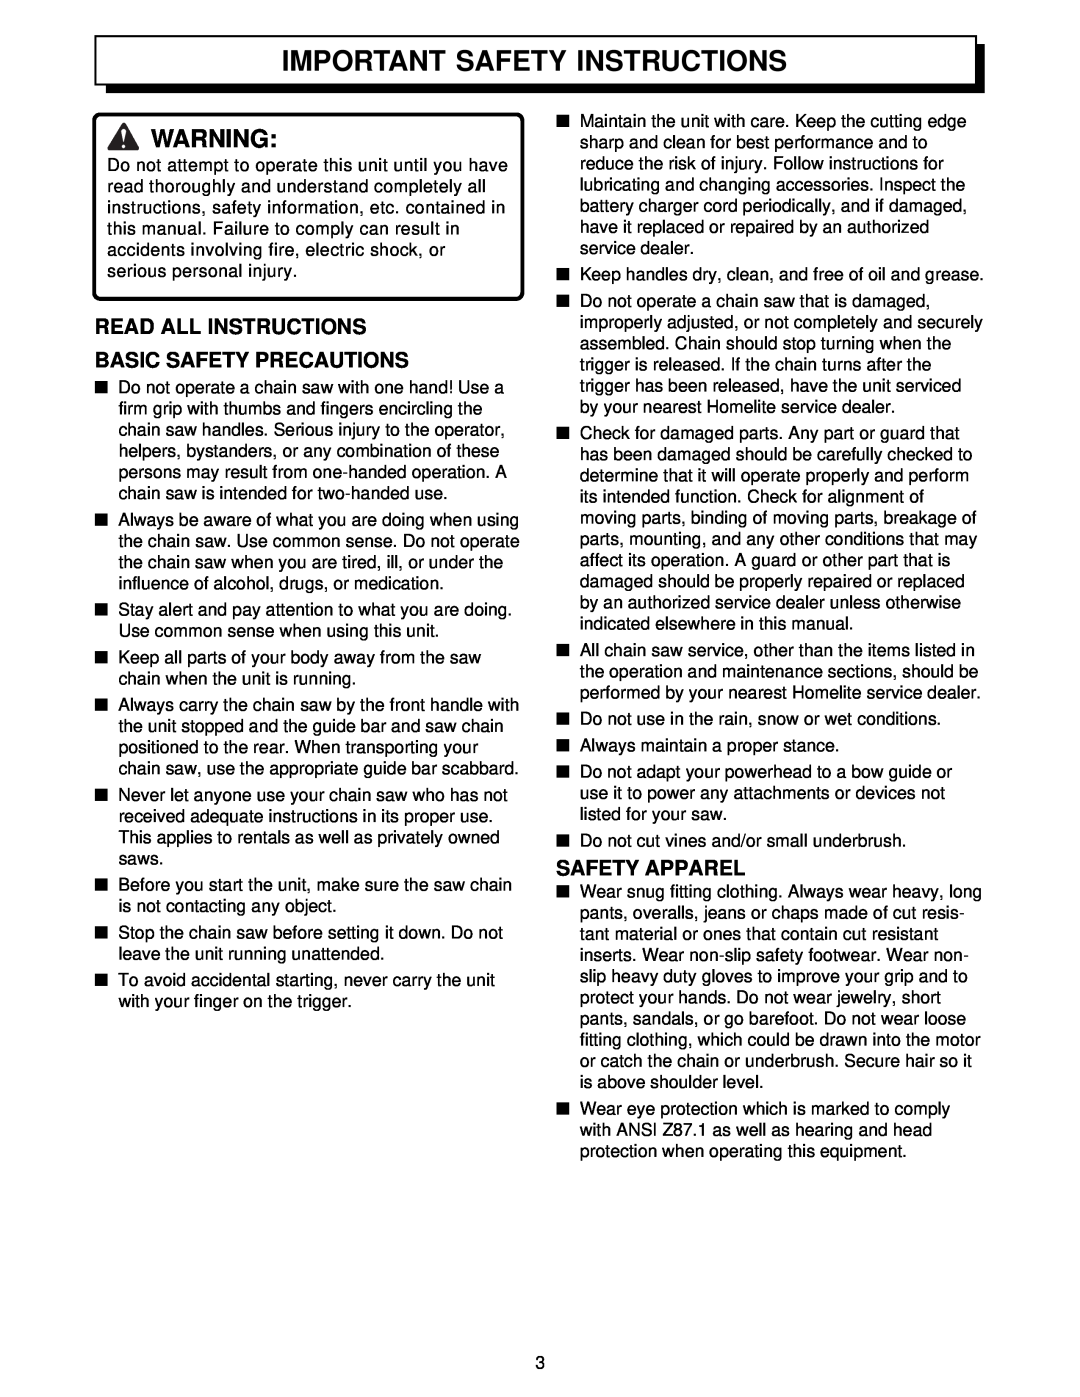 Homelite UT34010 manual Important Safety Instructions, Read All Instructions Basic Safety Precautions, Safety Apparel 